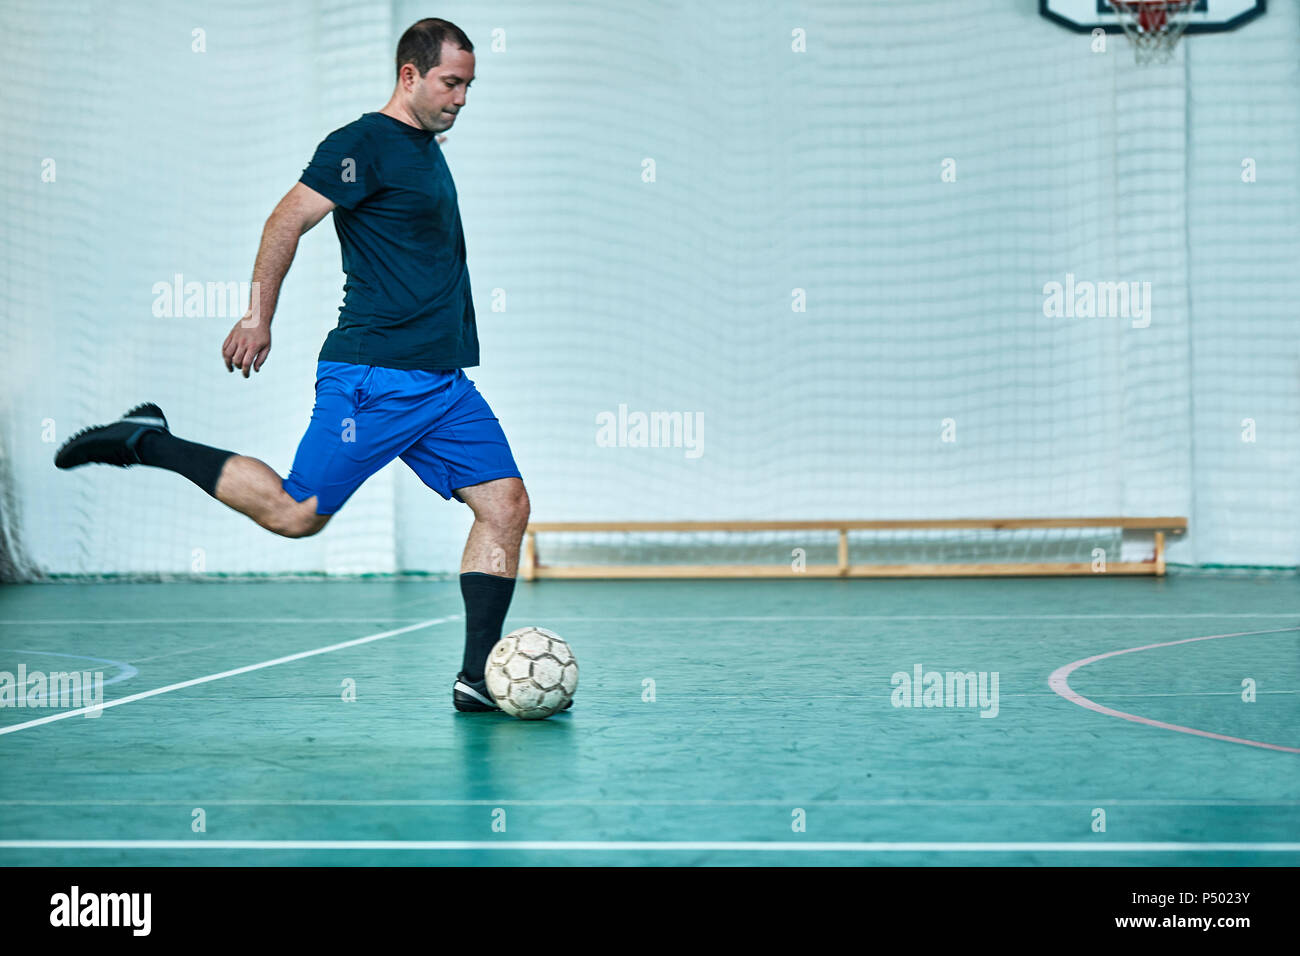 Man playing indoor soccer shooting the ball Stock Photo